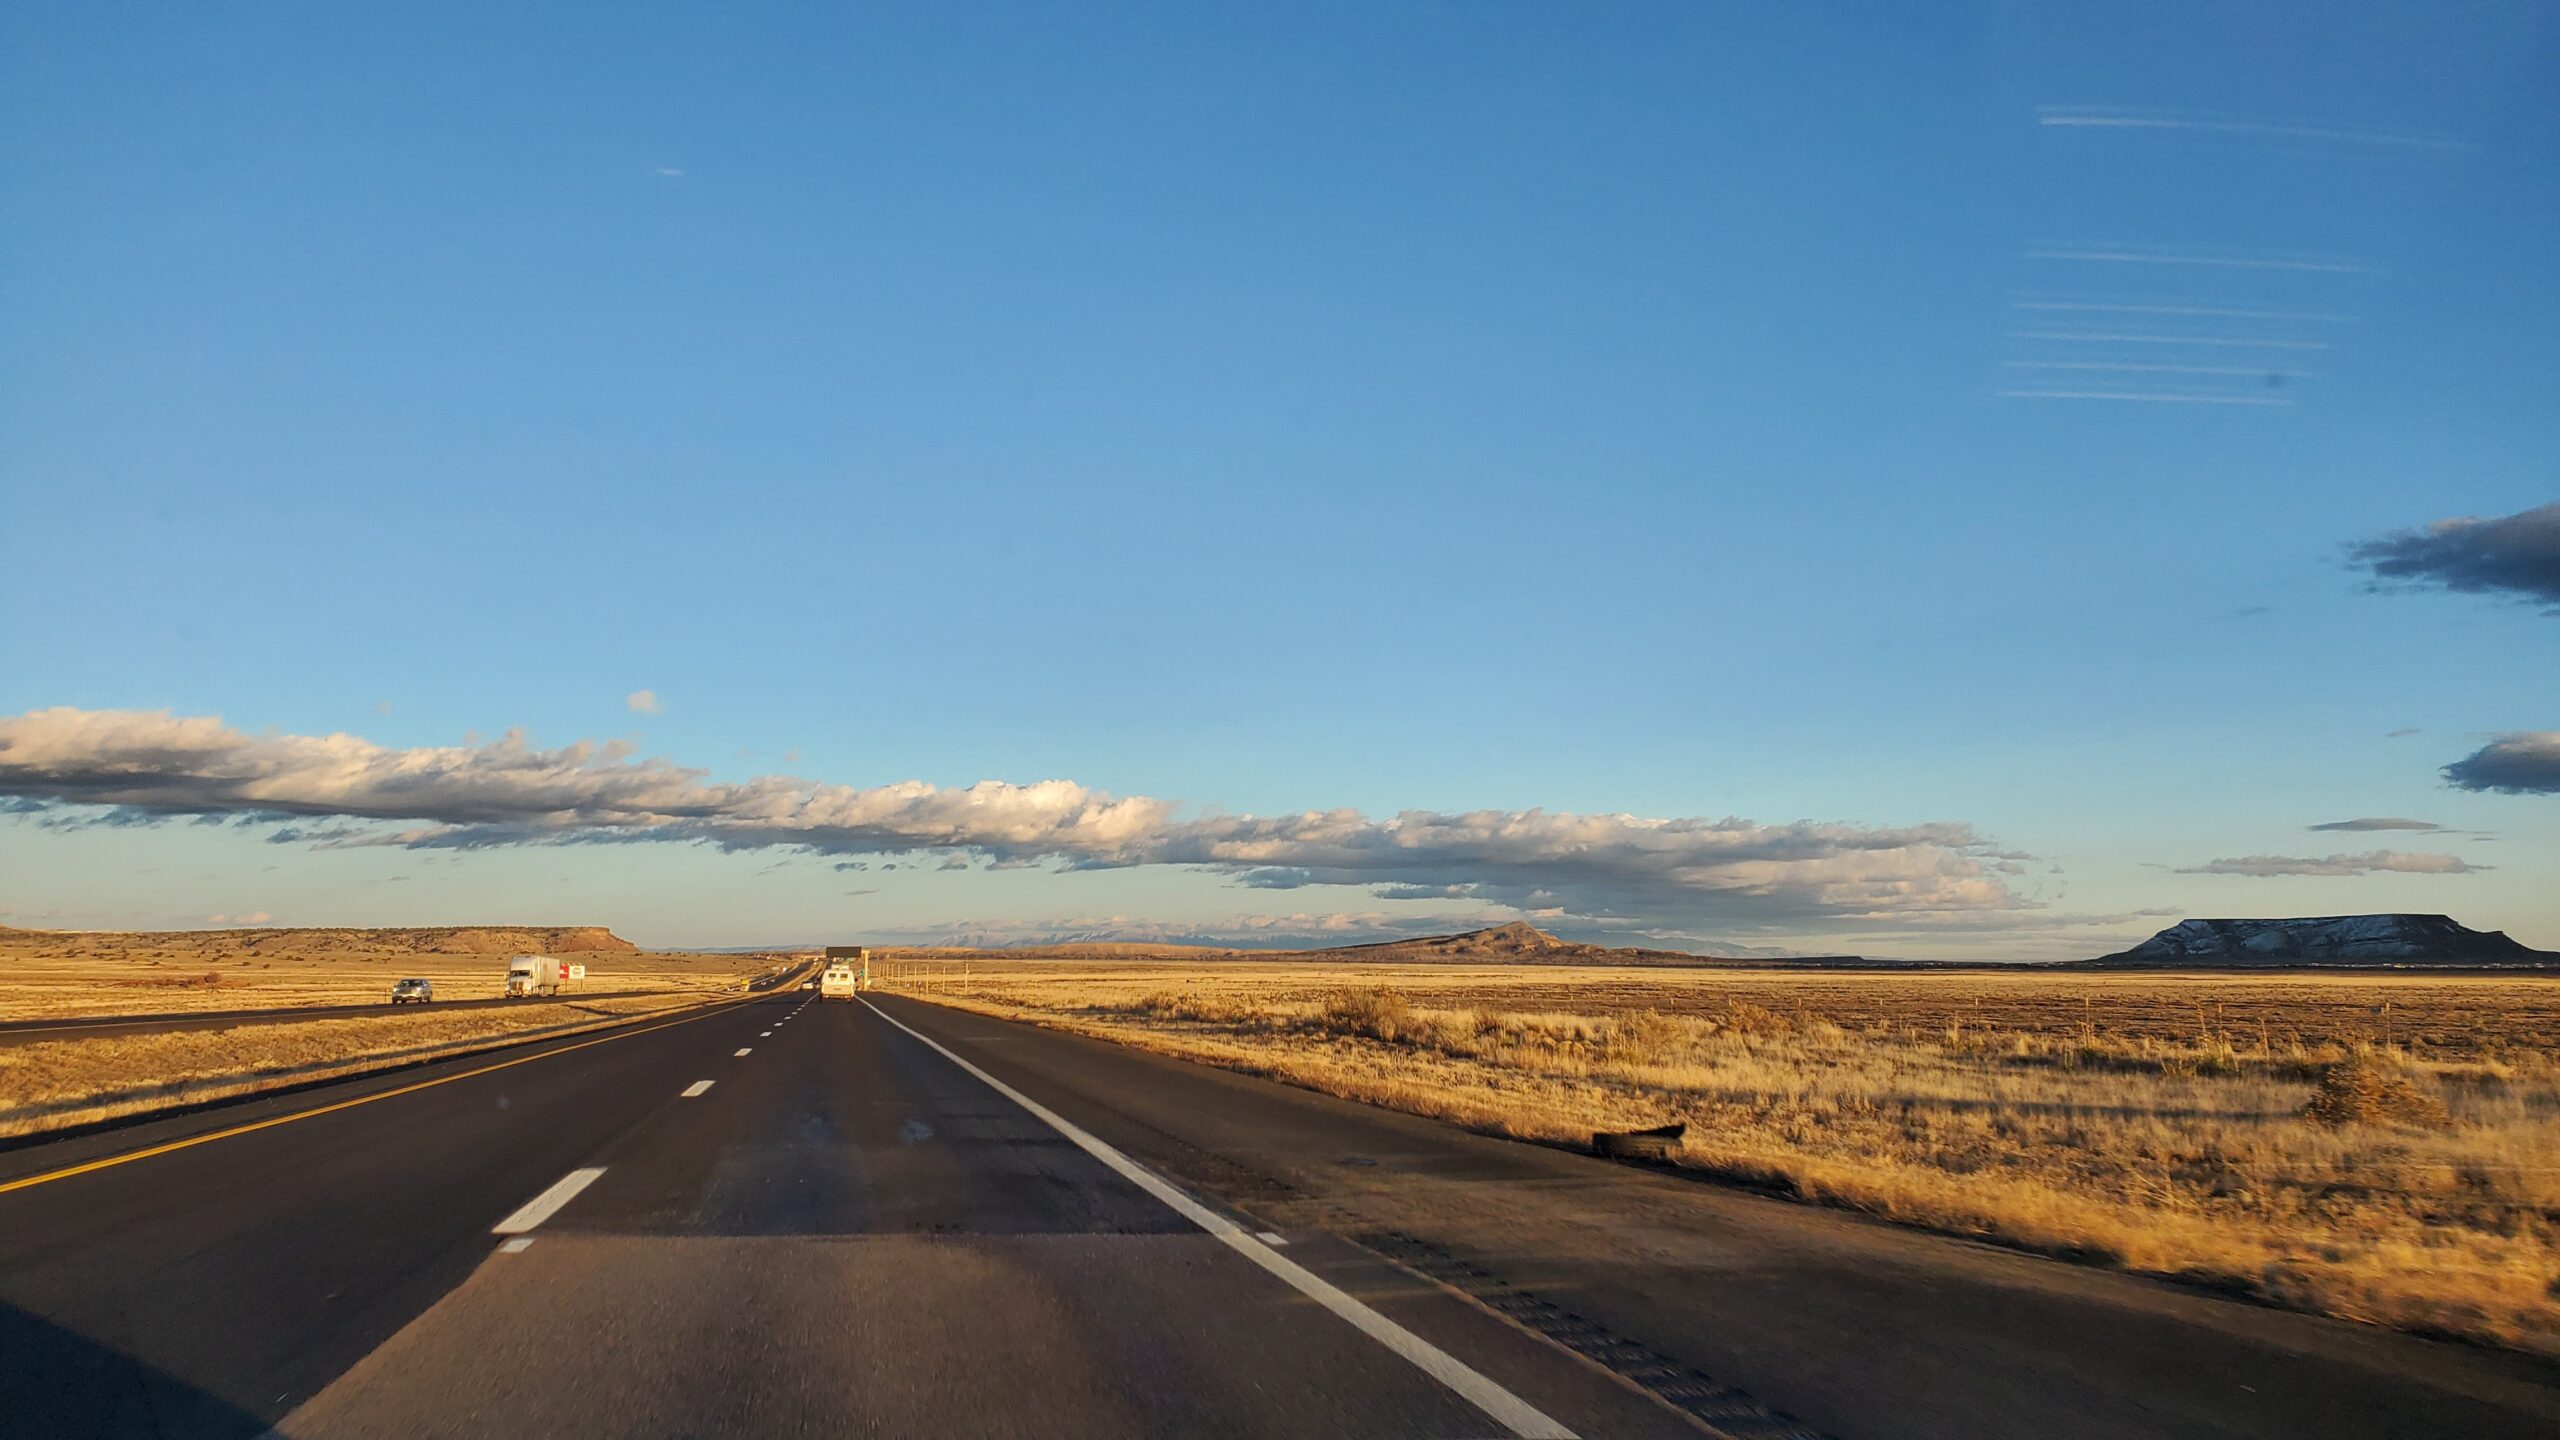 Photo of a desert highway. The horizon is low, ground flat save for a few mesas in the distance.